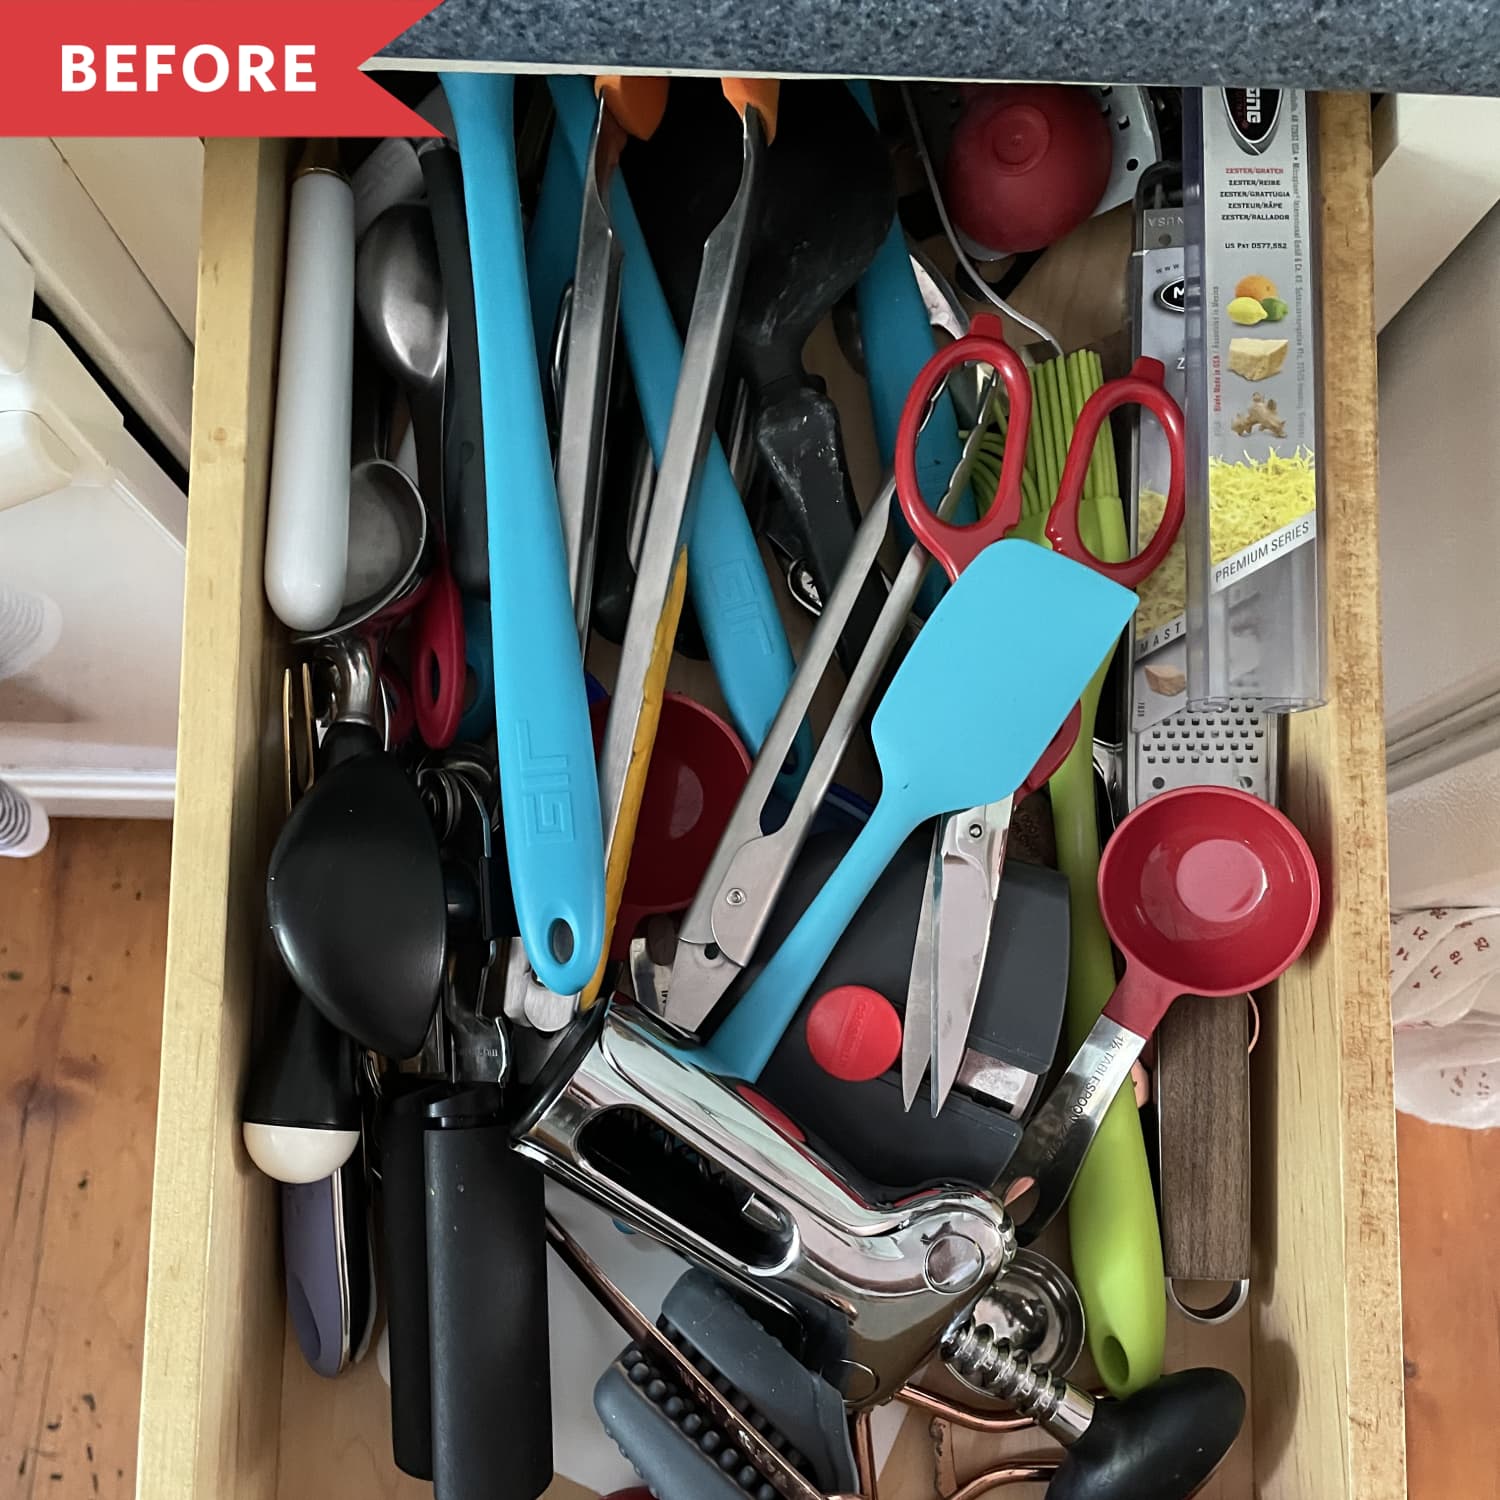 OXO Expandable On-The-Wall Organizer Review